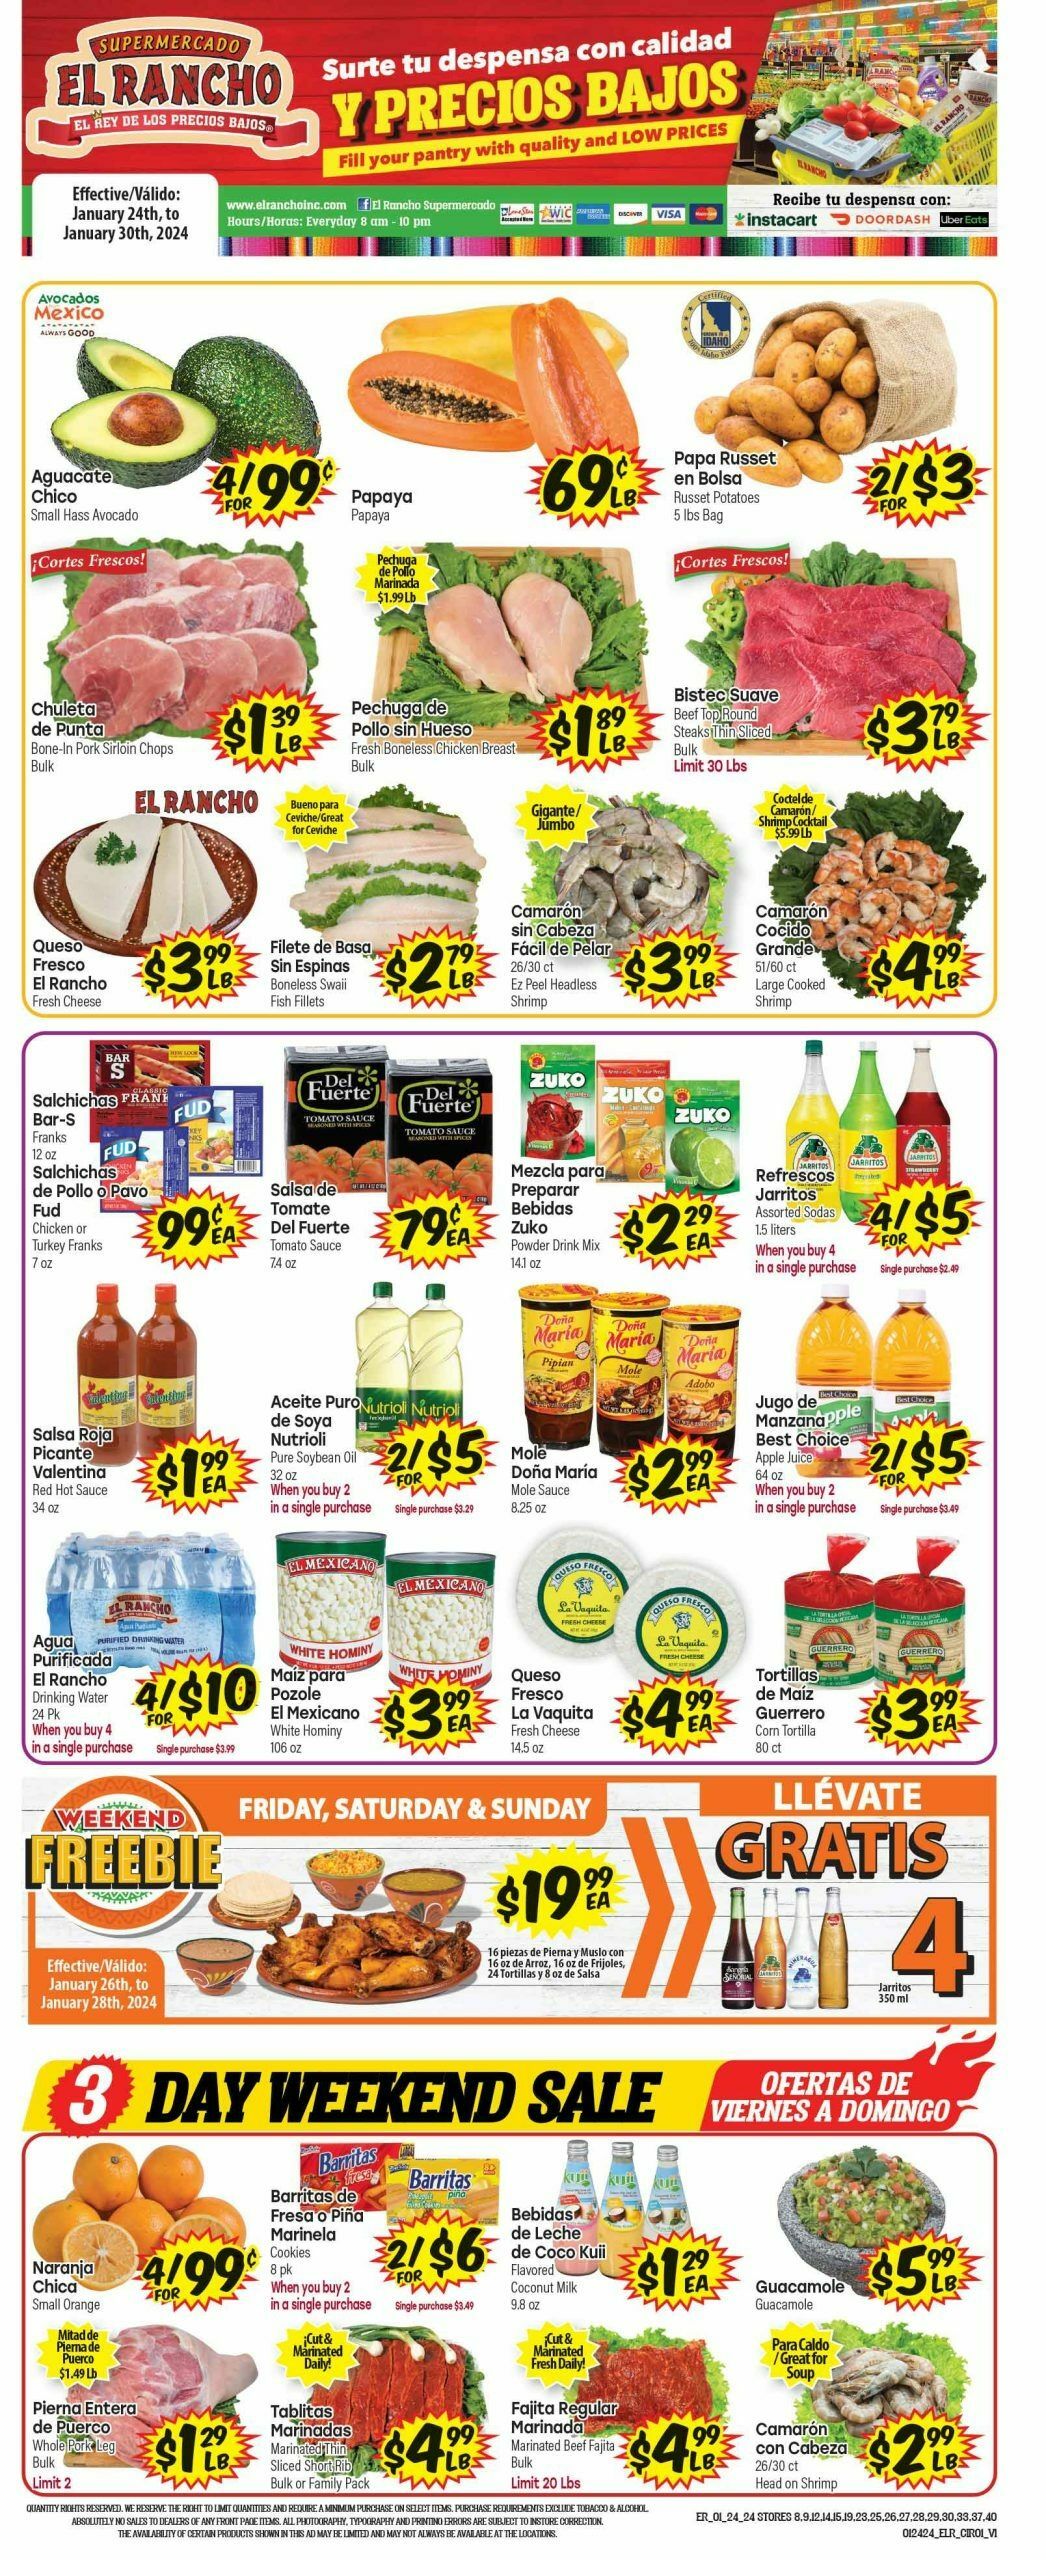 El Rancho Weekly Ads from January 24